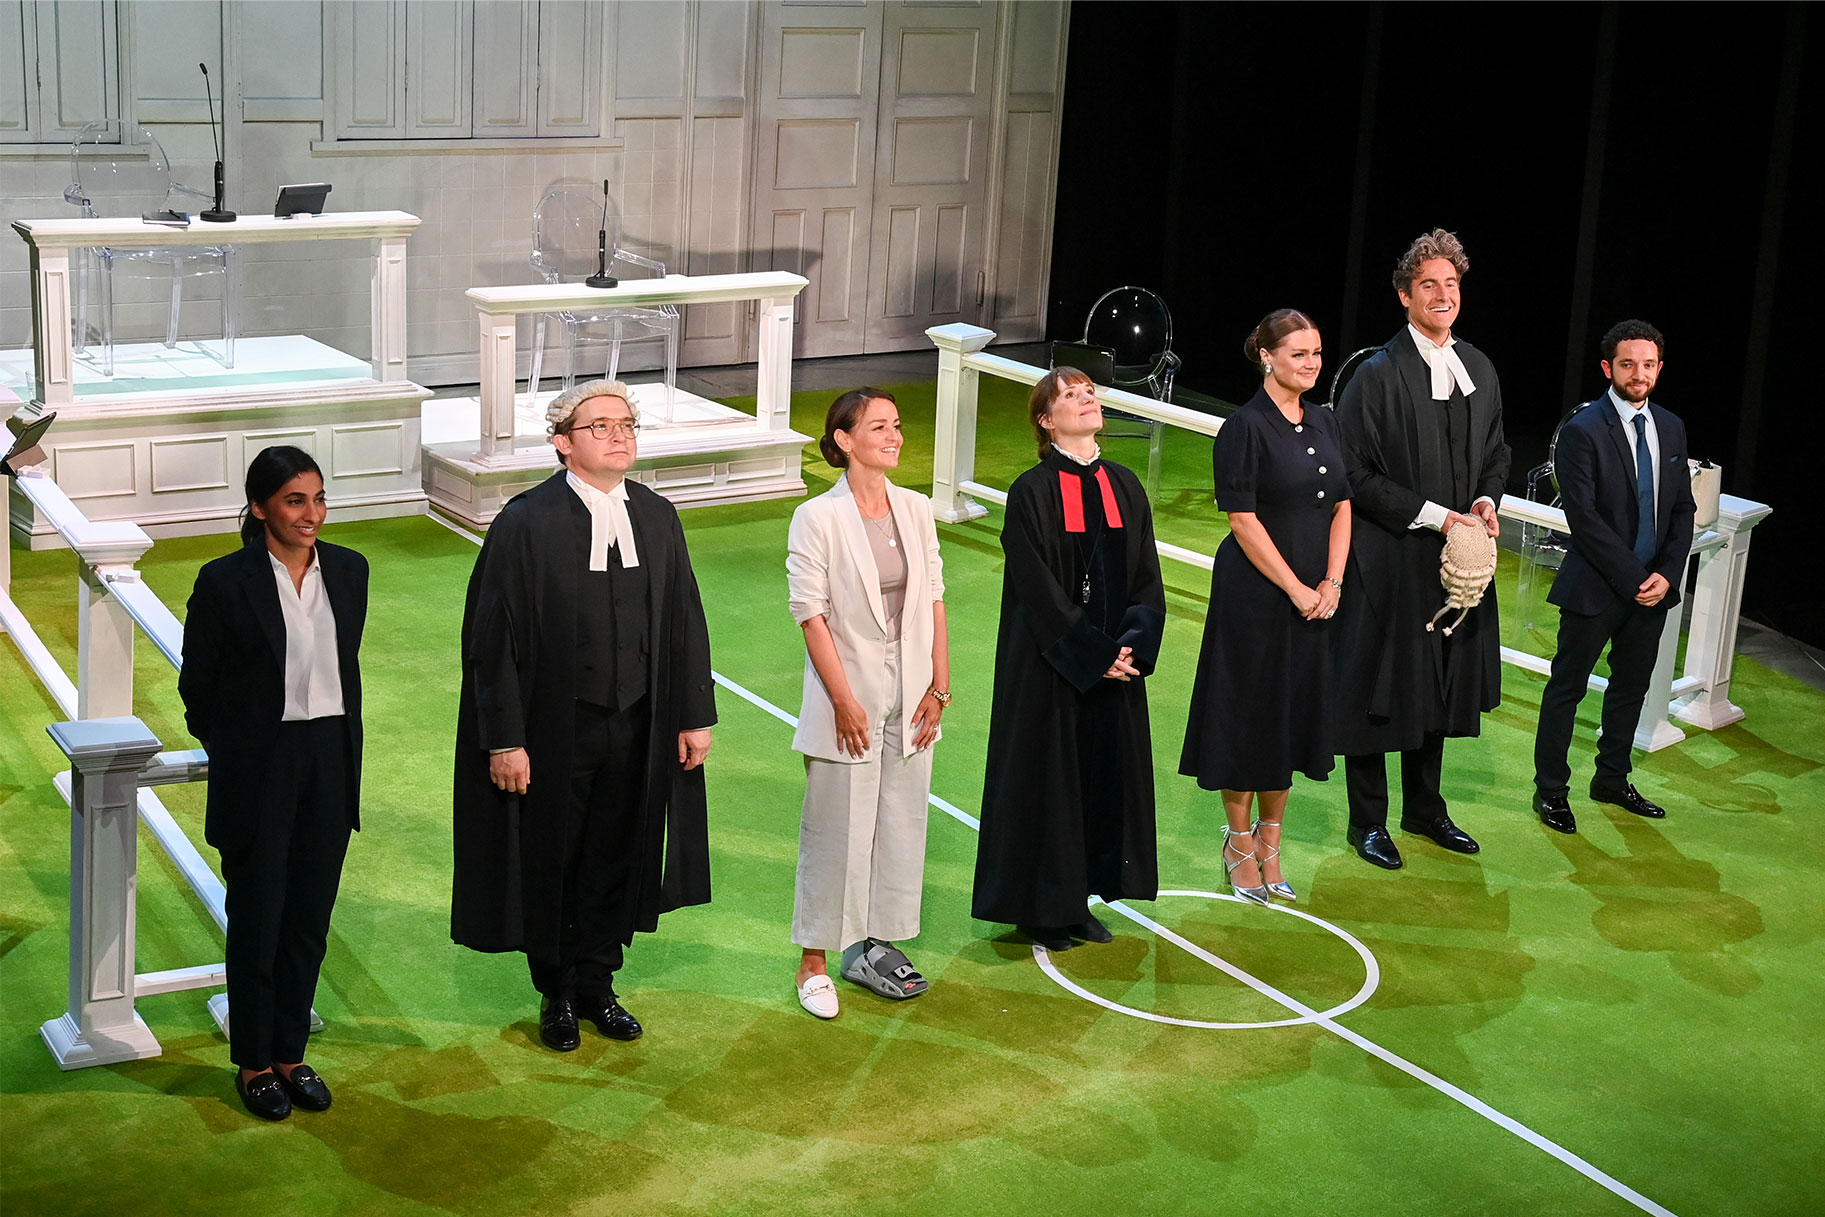 Sharan Phull, Jonathan Broadbent, Laura Dos Santos, Charlotte Randle, Lucy May Barker, Tom Turner and Nathan McMullen onstage during the curtain call at the press night performance of "Vardy V Rooney: The Wagatha Christie Trial"